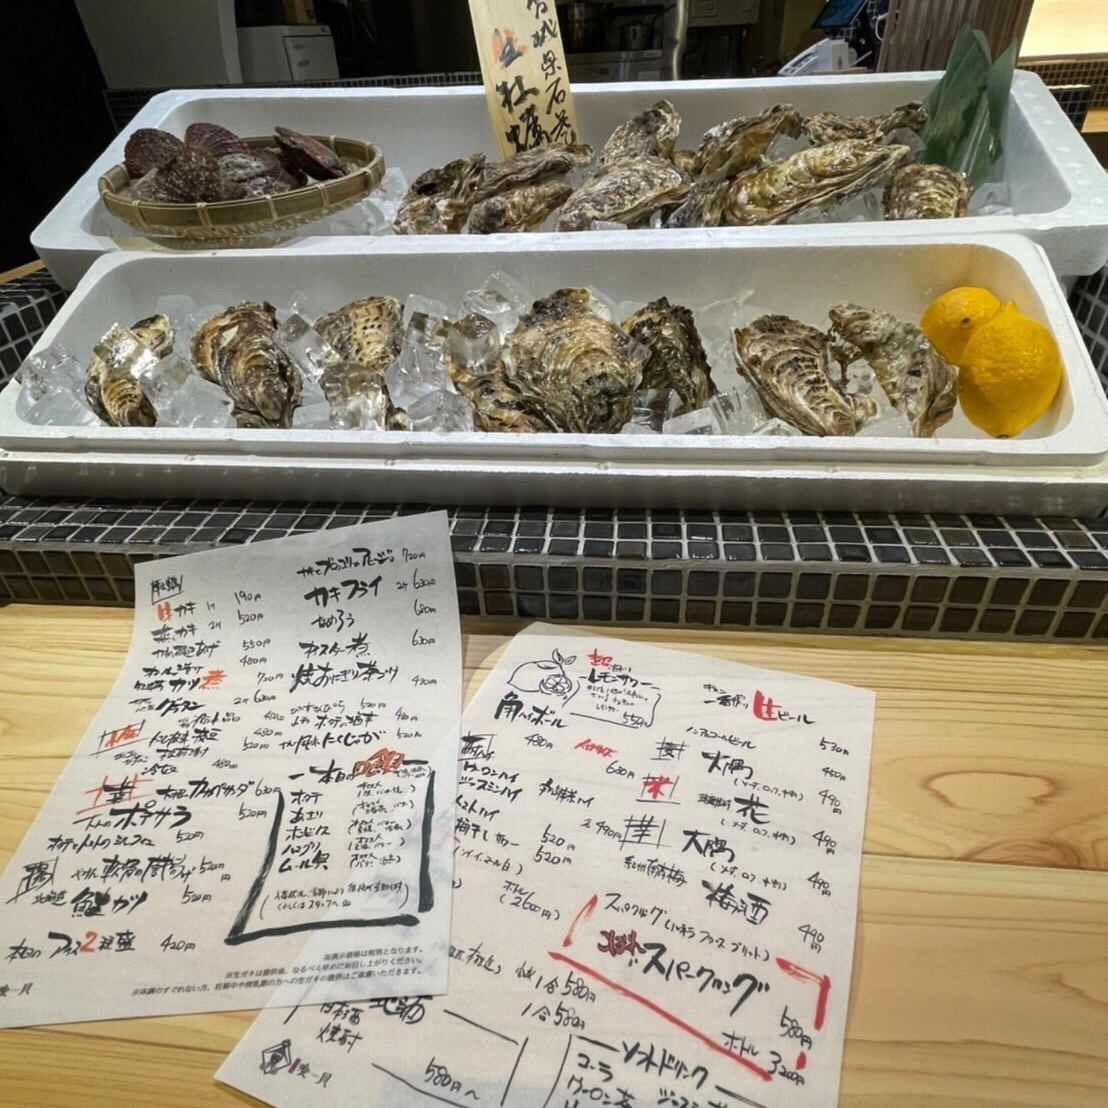 2 minutes walk from Yokohama Station ◆ Oyster dishes in a fashionable space